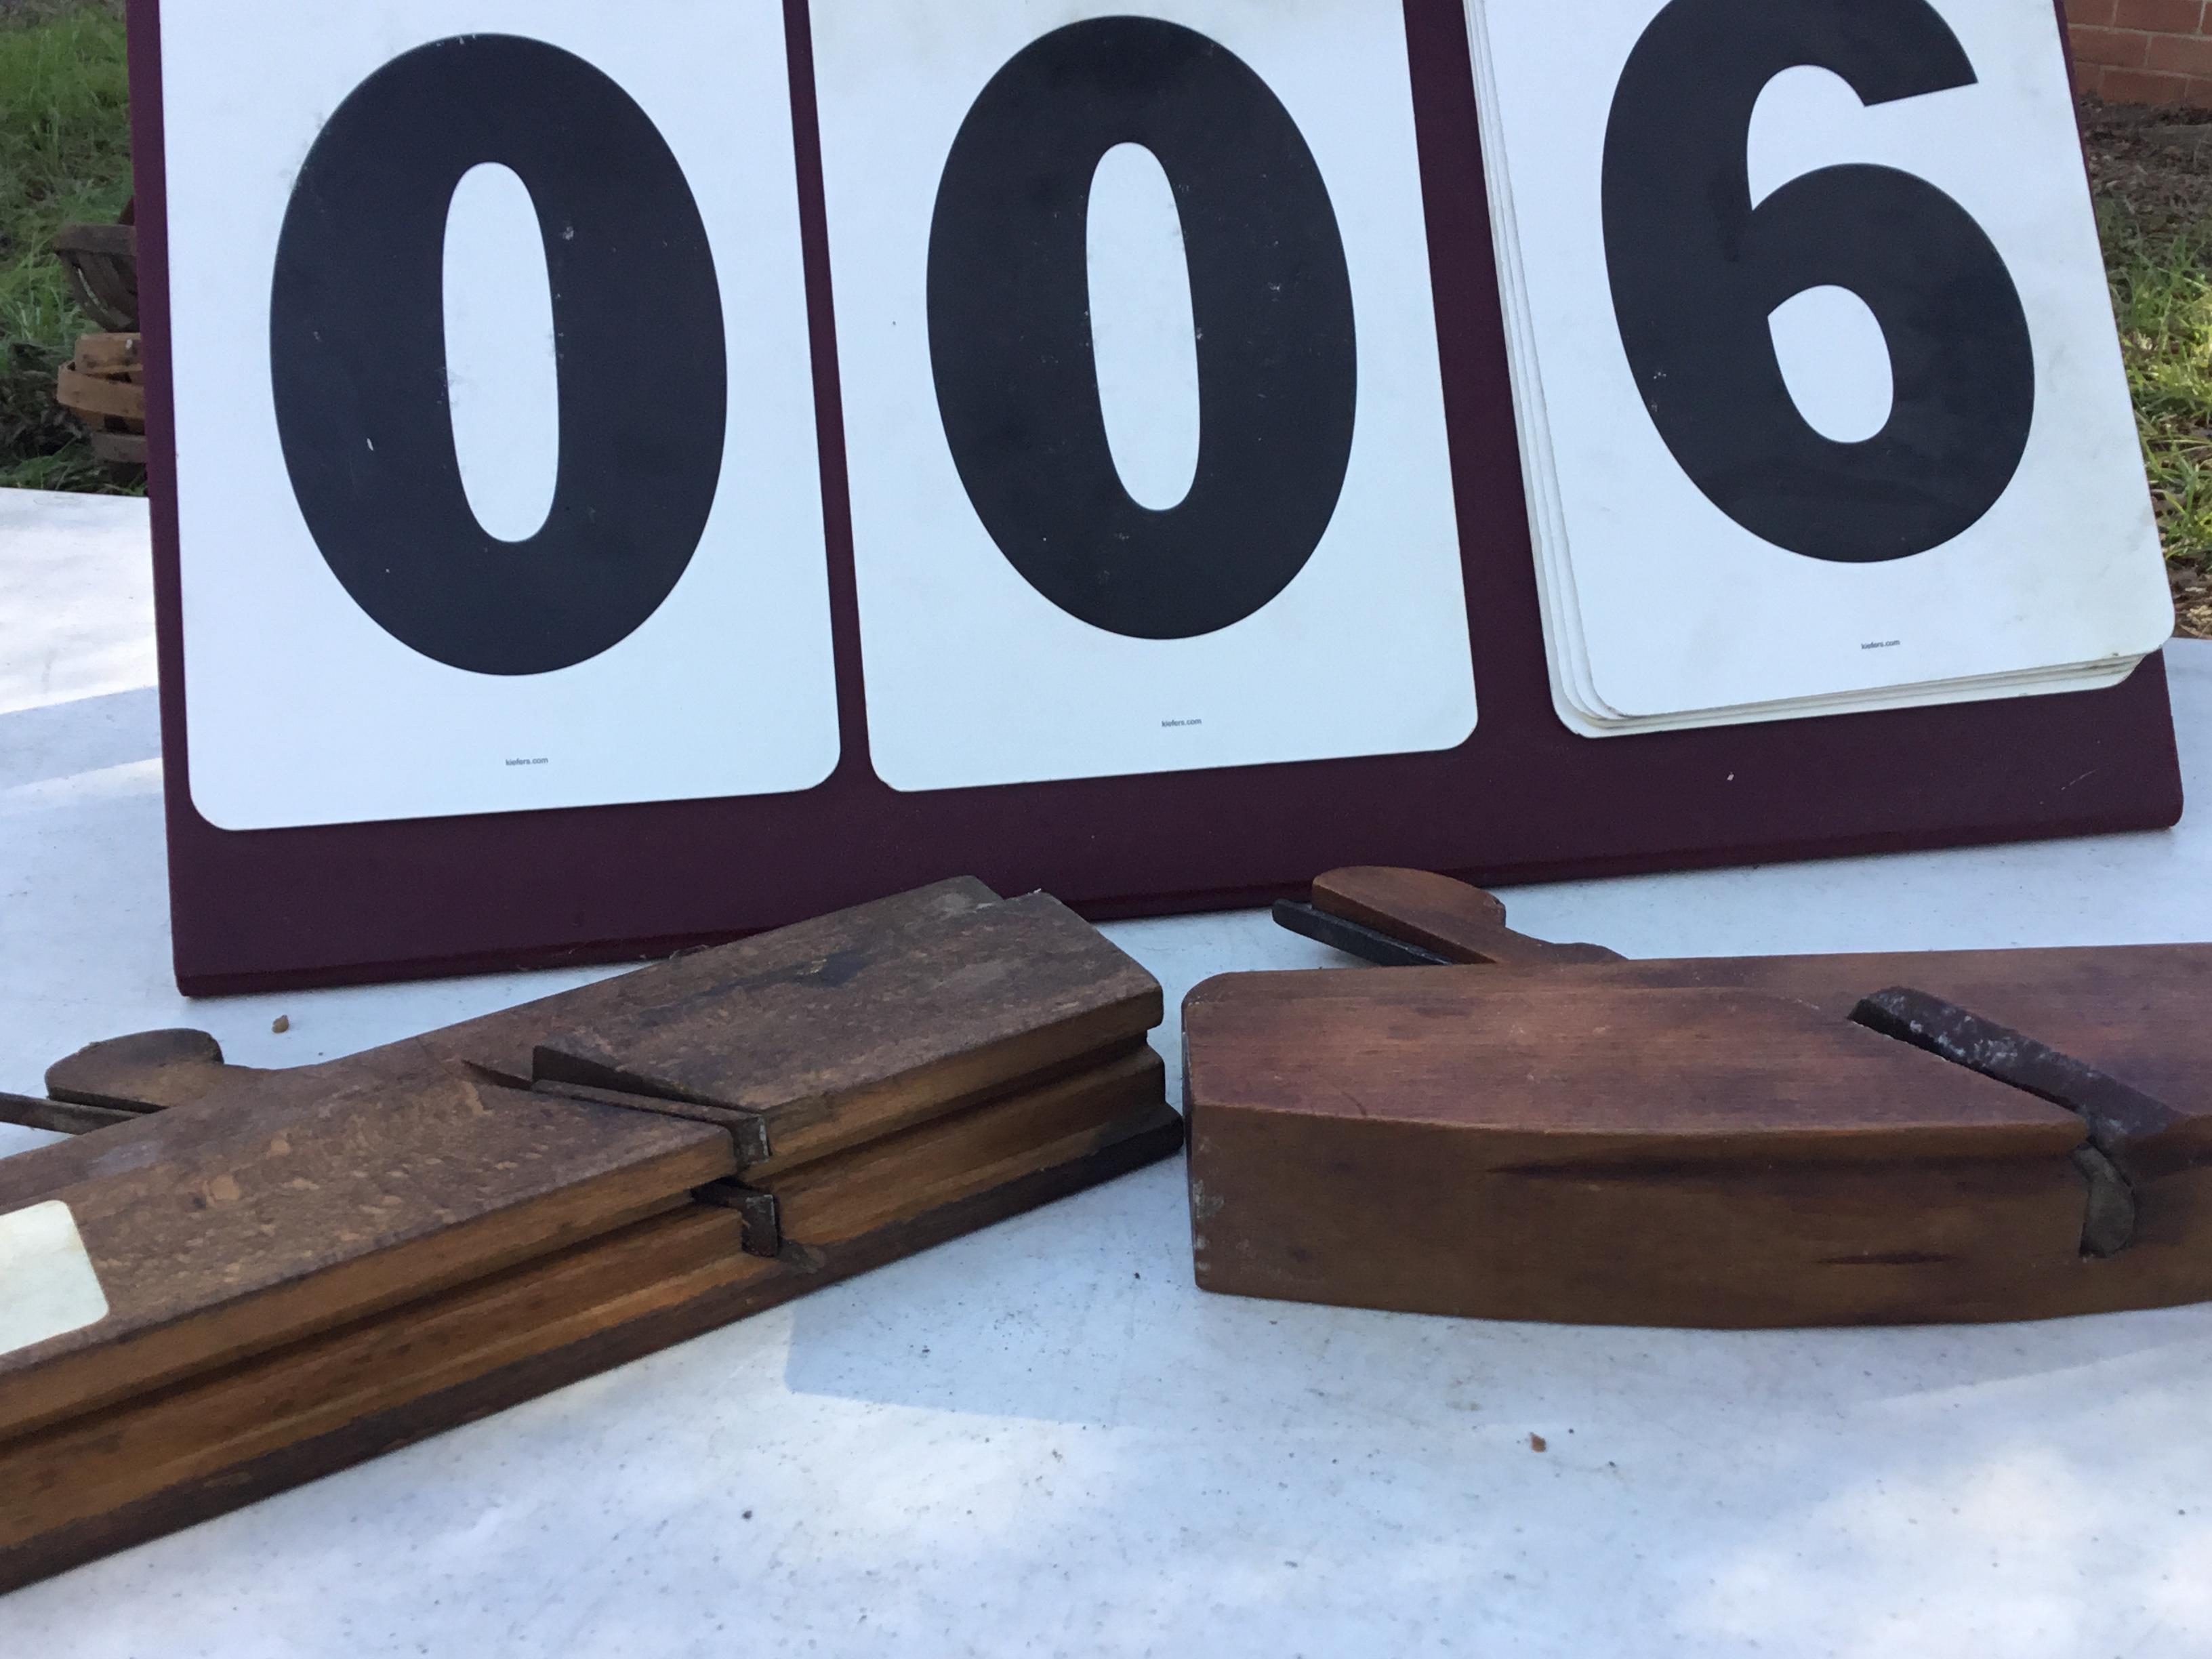 Pair of old planes, 1 tongue grooved plane, 1 not labeled      SIZE: approx. 10" long